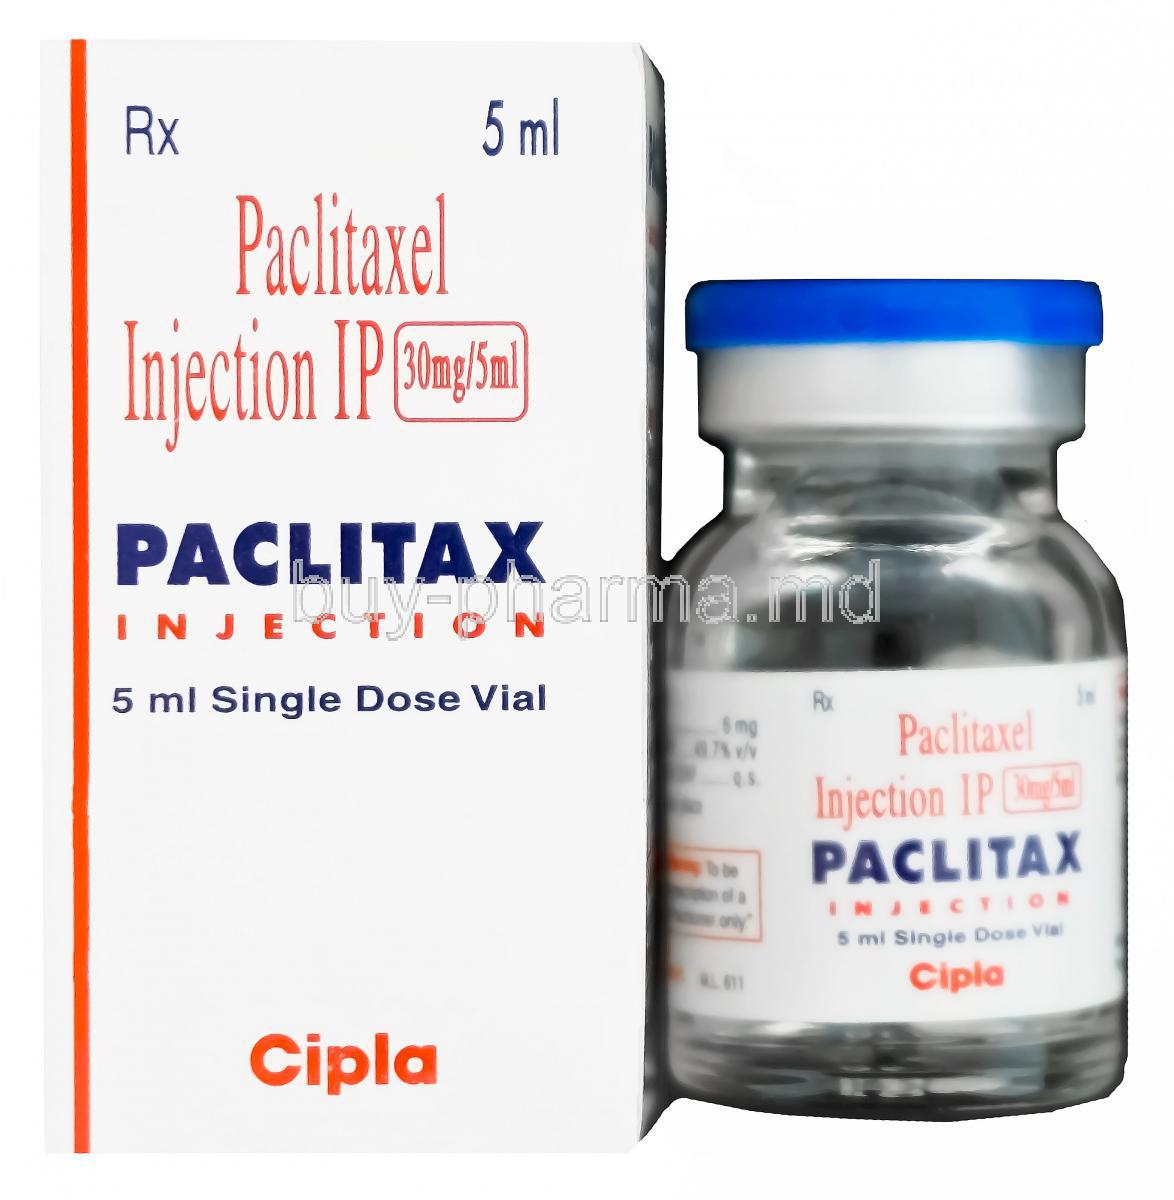 Paclitax Injection, Generic Taxol, Paclitaxel Injection Vial 30mg per 5ml